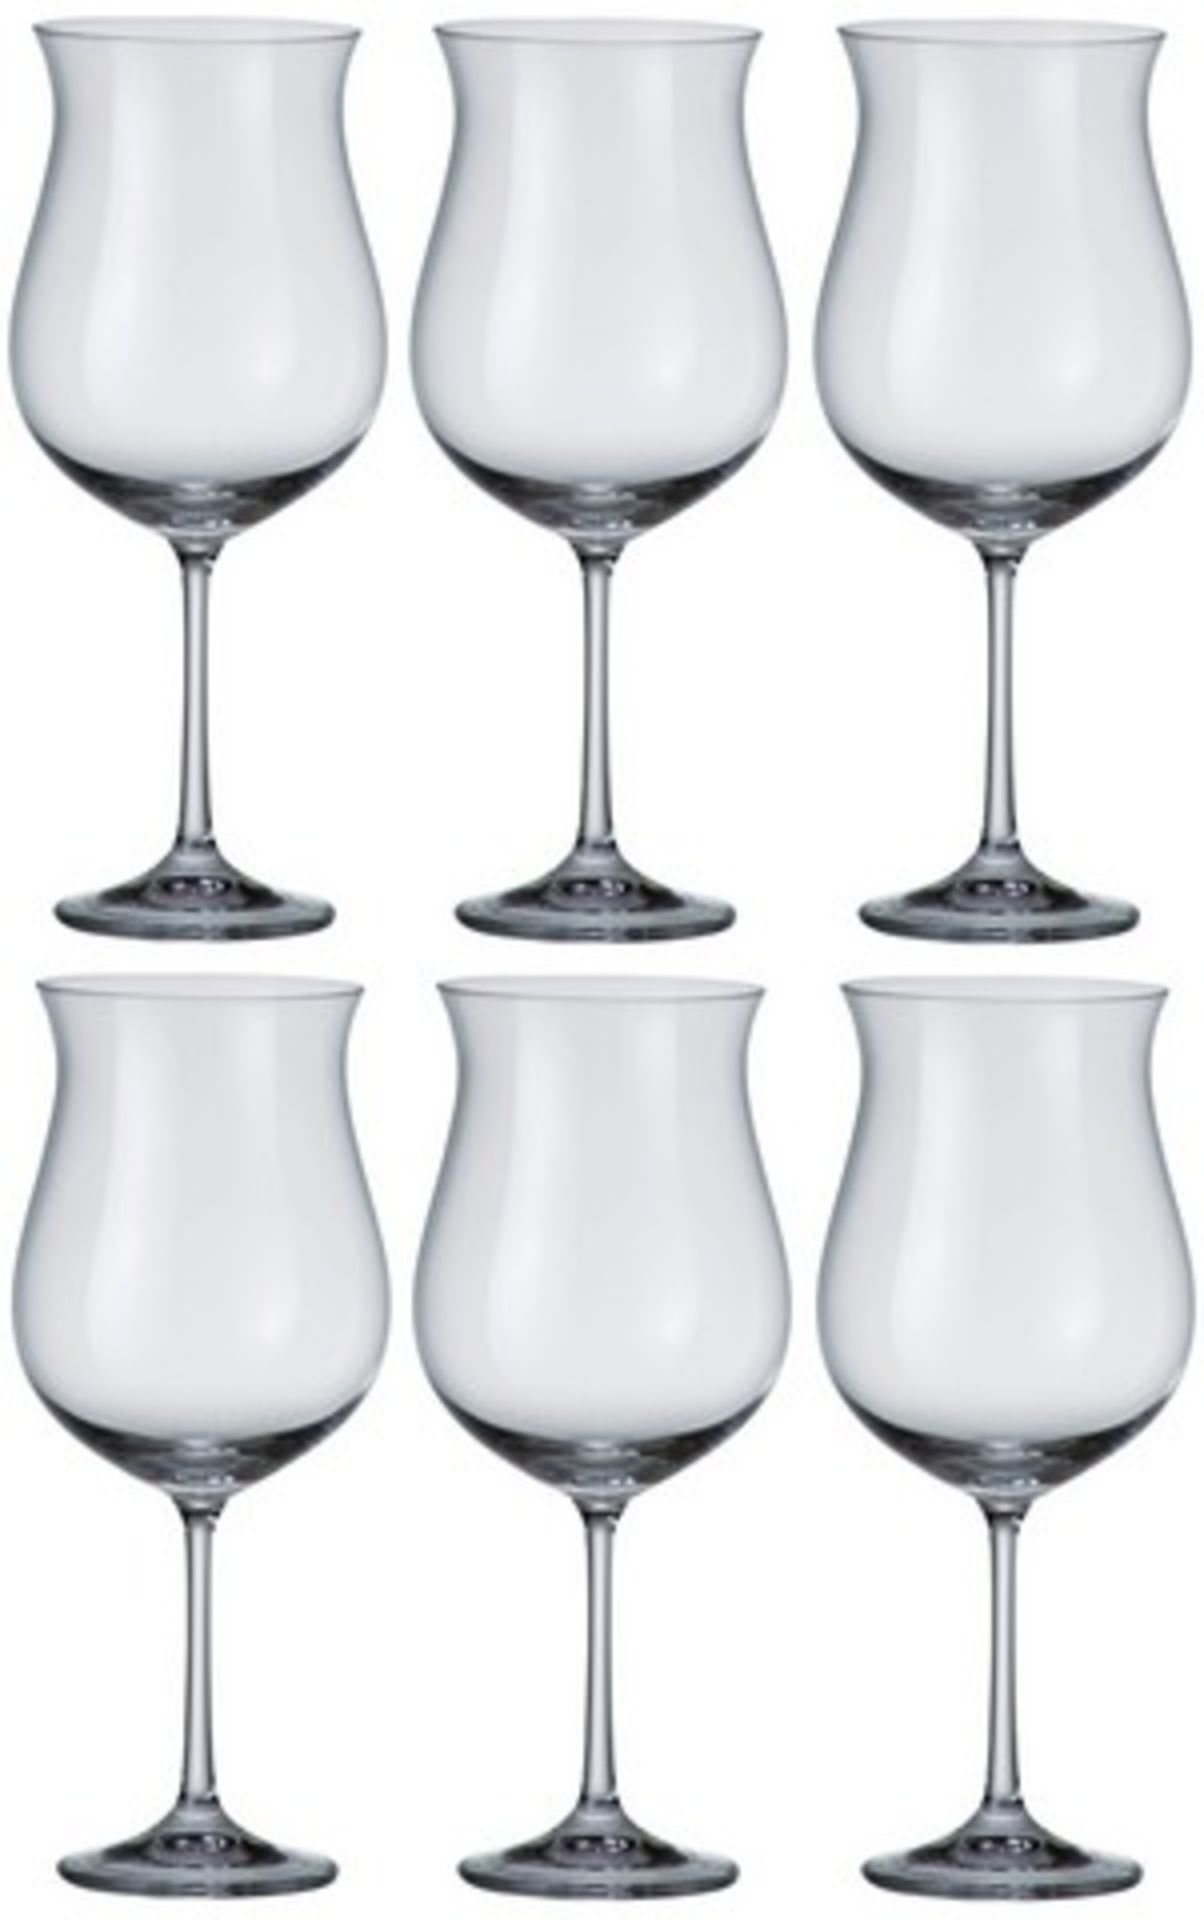 + VAT Brand New Pack of Six 640ml Red Wine Glasses - Large Sized Bowl - Dishwasher Safe - Durable